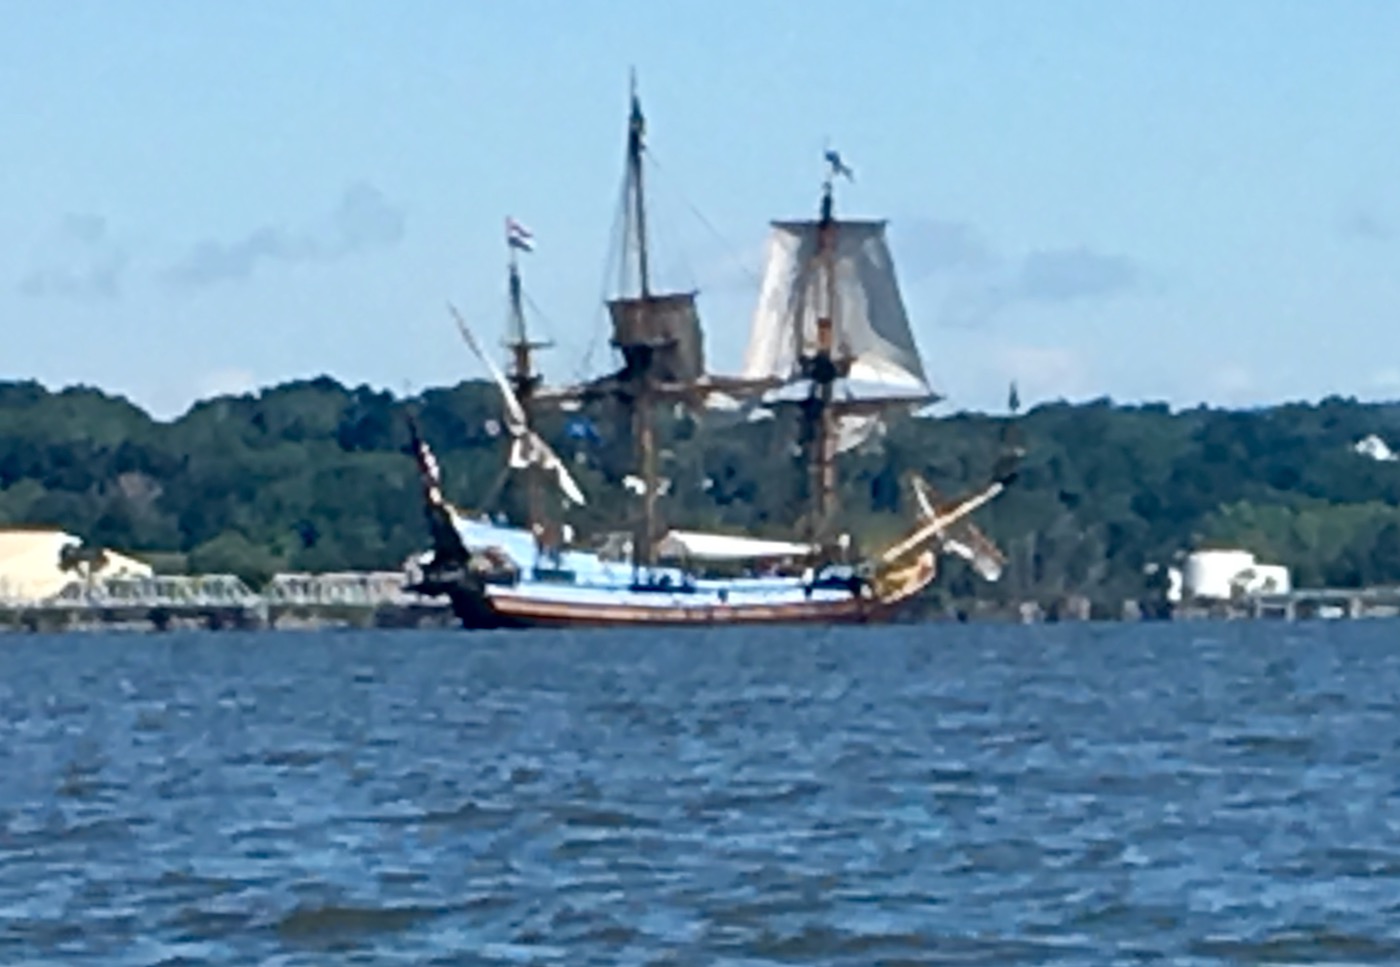 Tall Ship from the 1600s